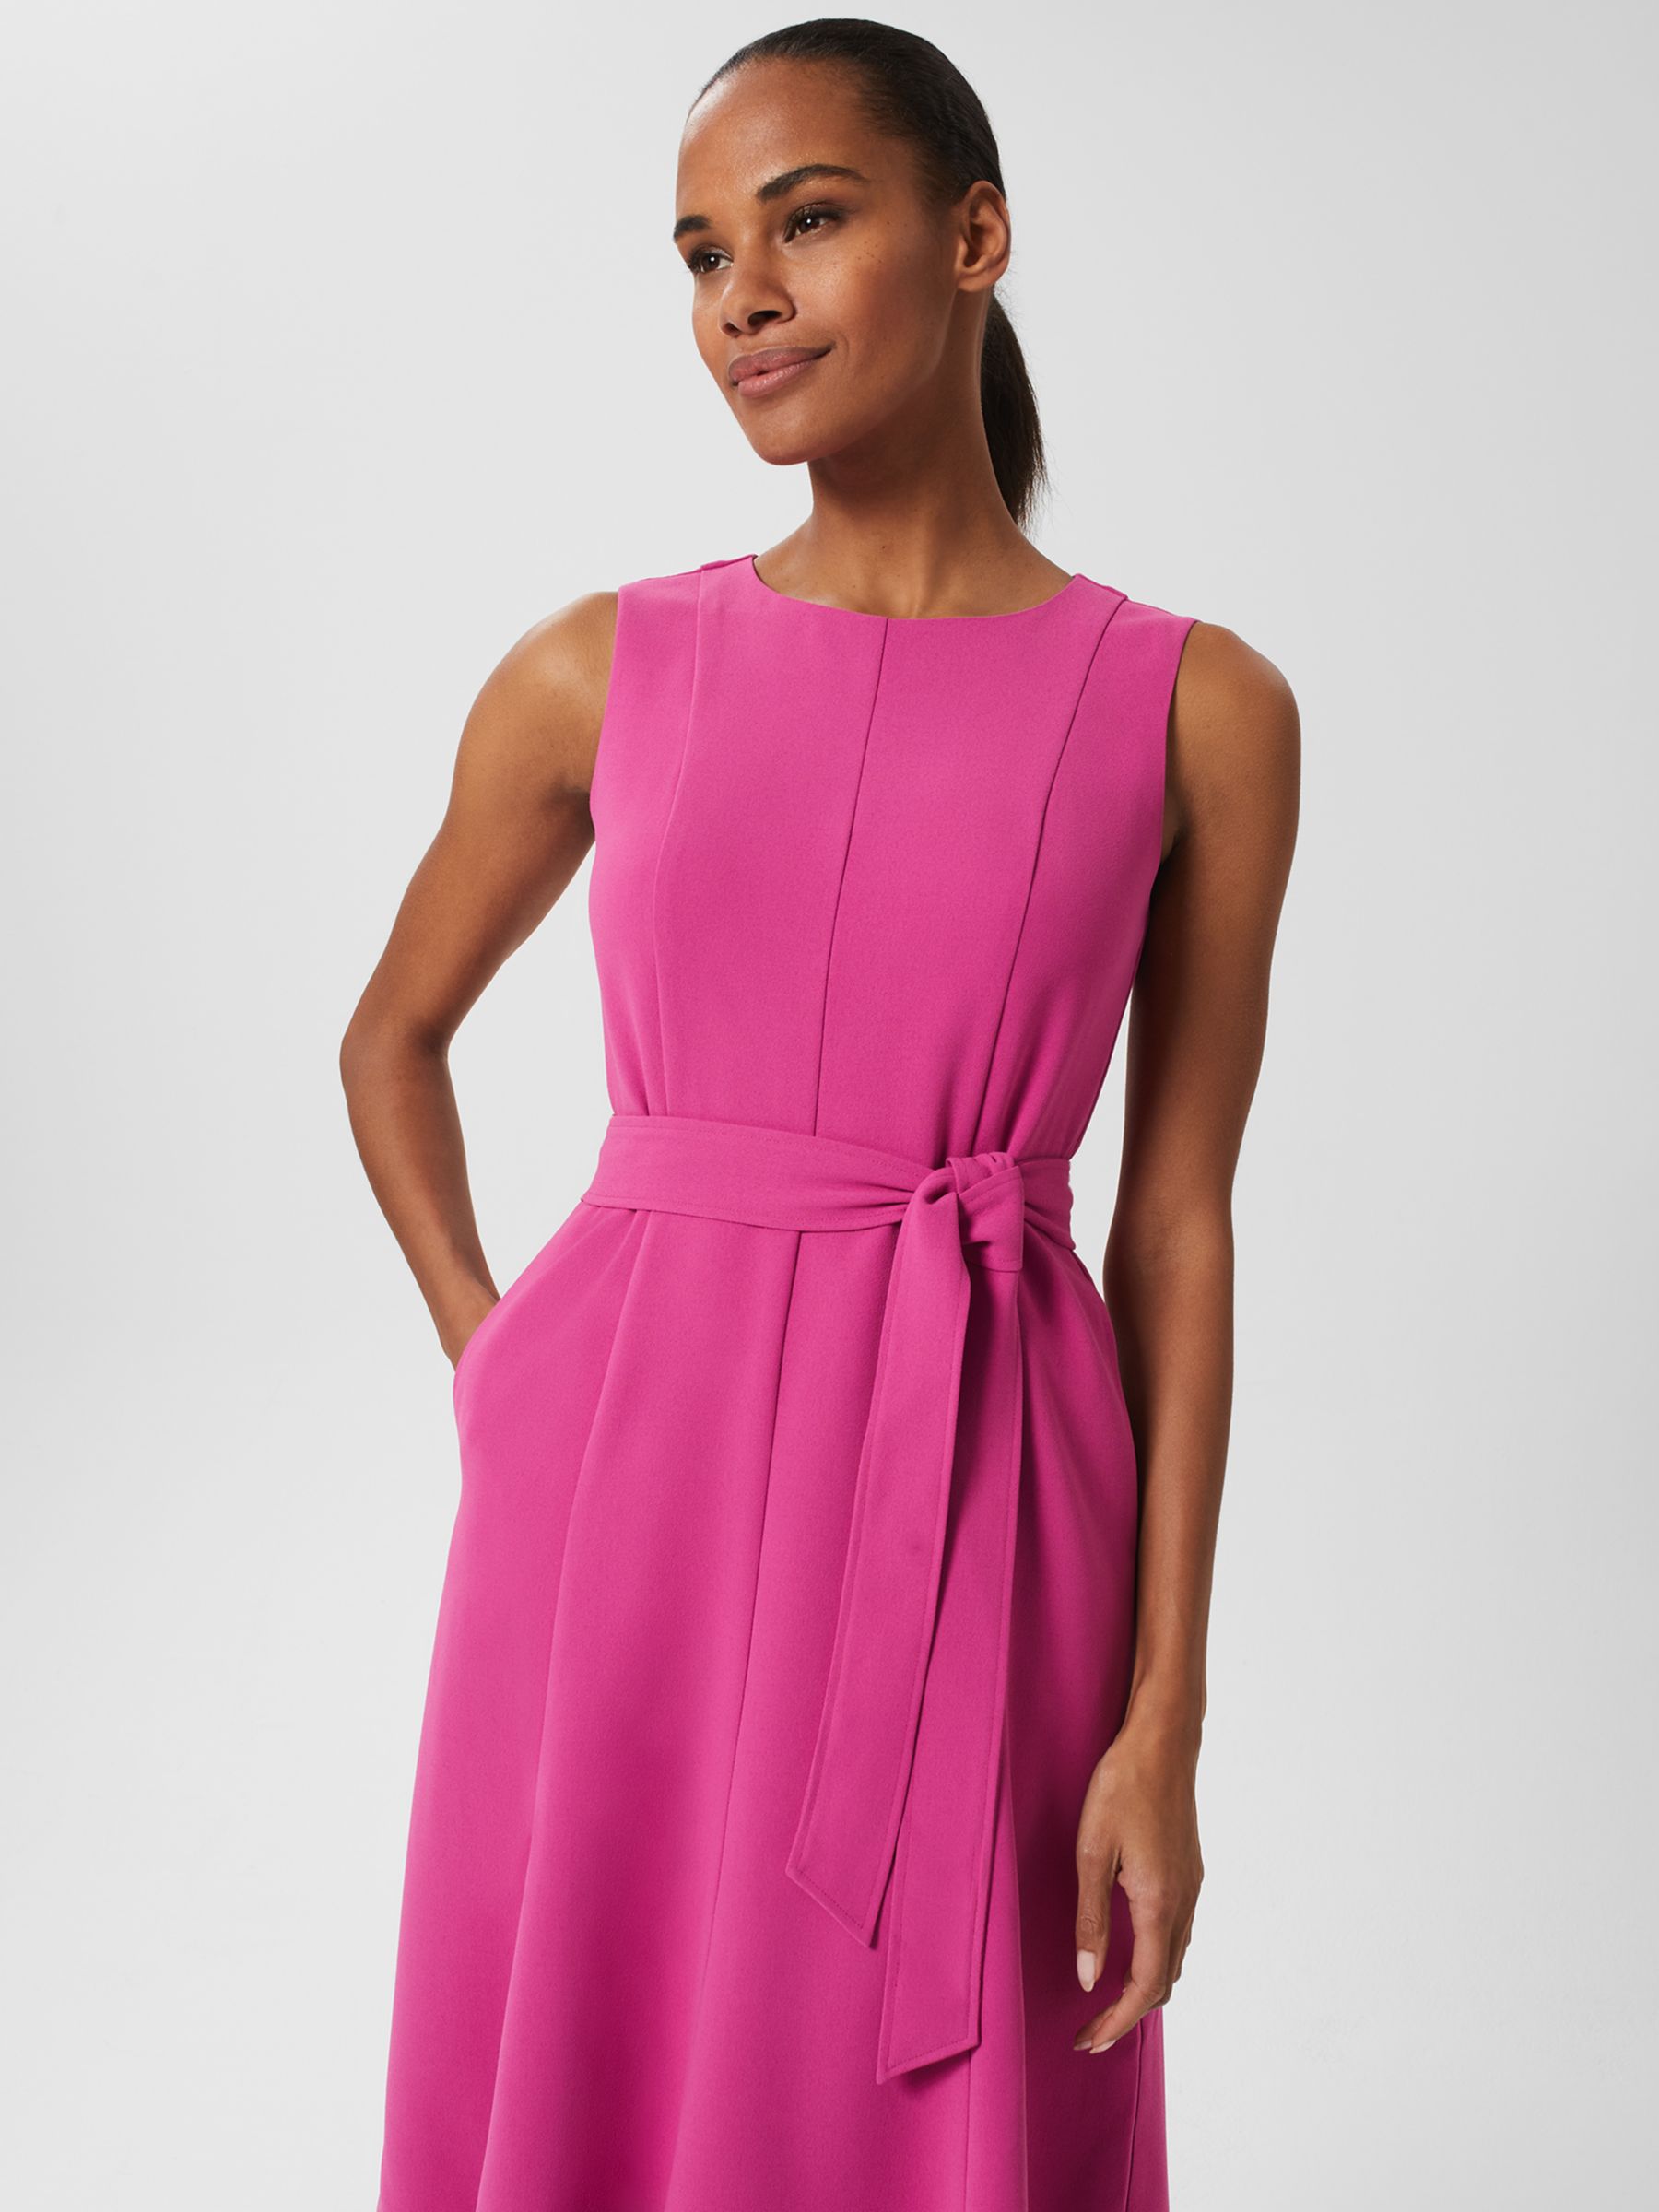 Hobbs Rory Belted Dress, Fuchsia at John Lewis & Partners